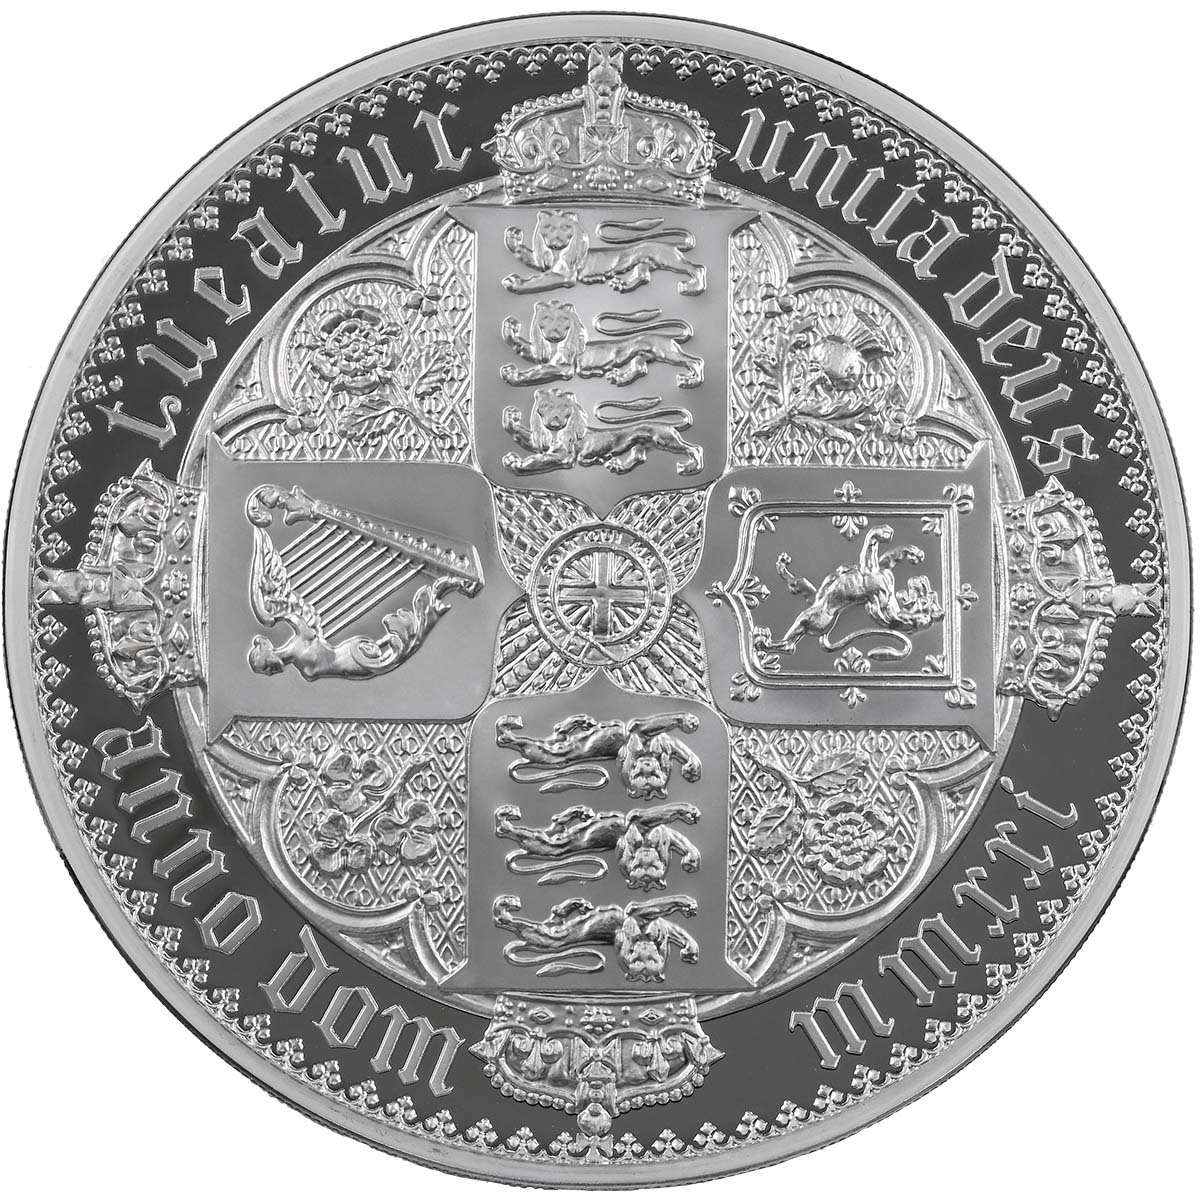 UK21R1ST 2021 Gothic Quartered Arms 1 Kilo Silver Proof Great Engravers Reverse